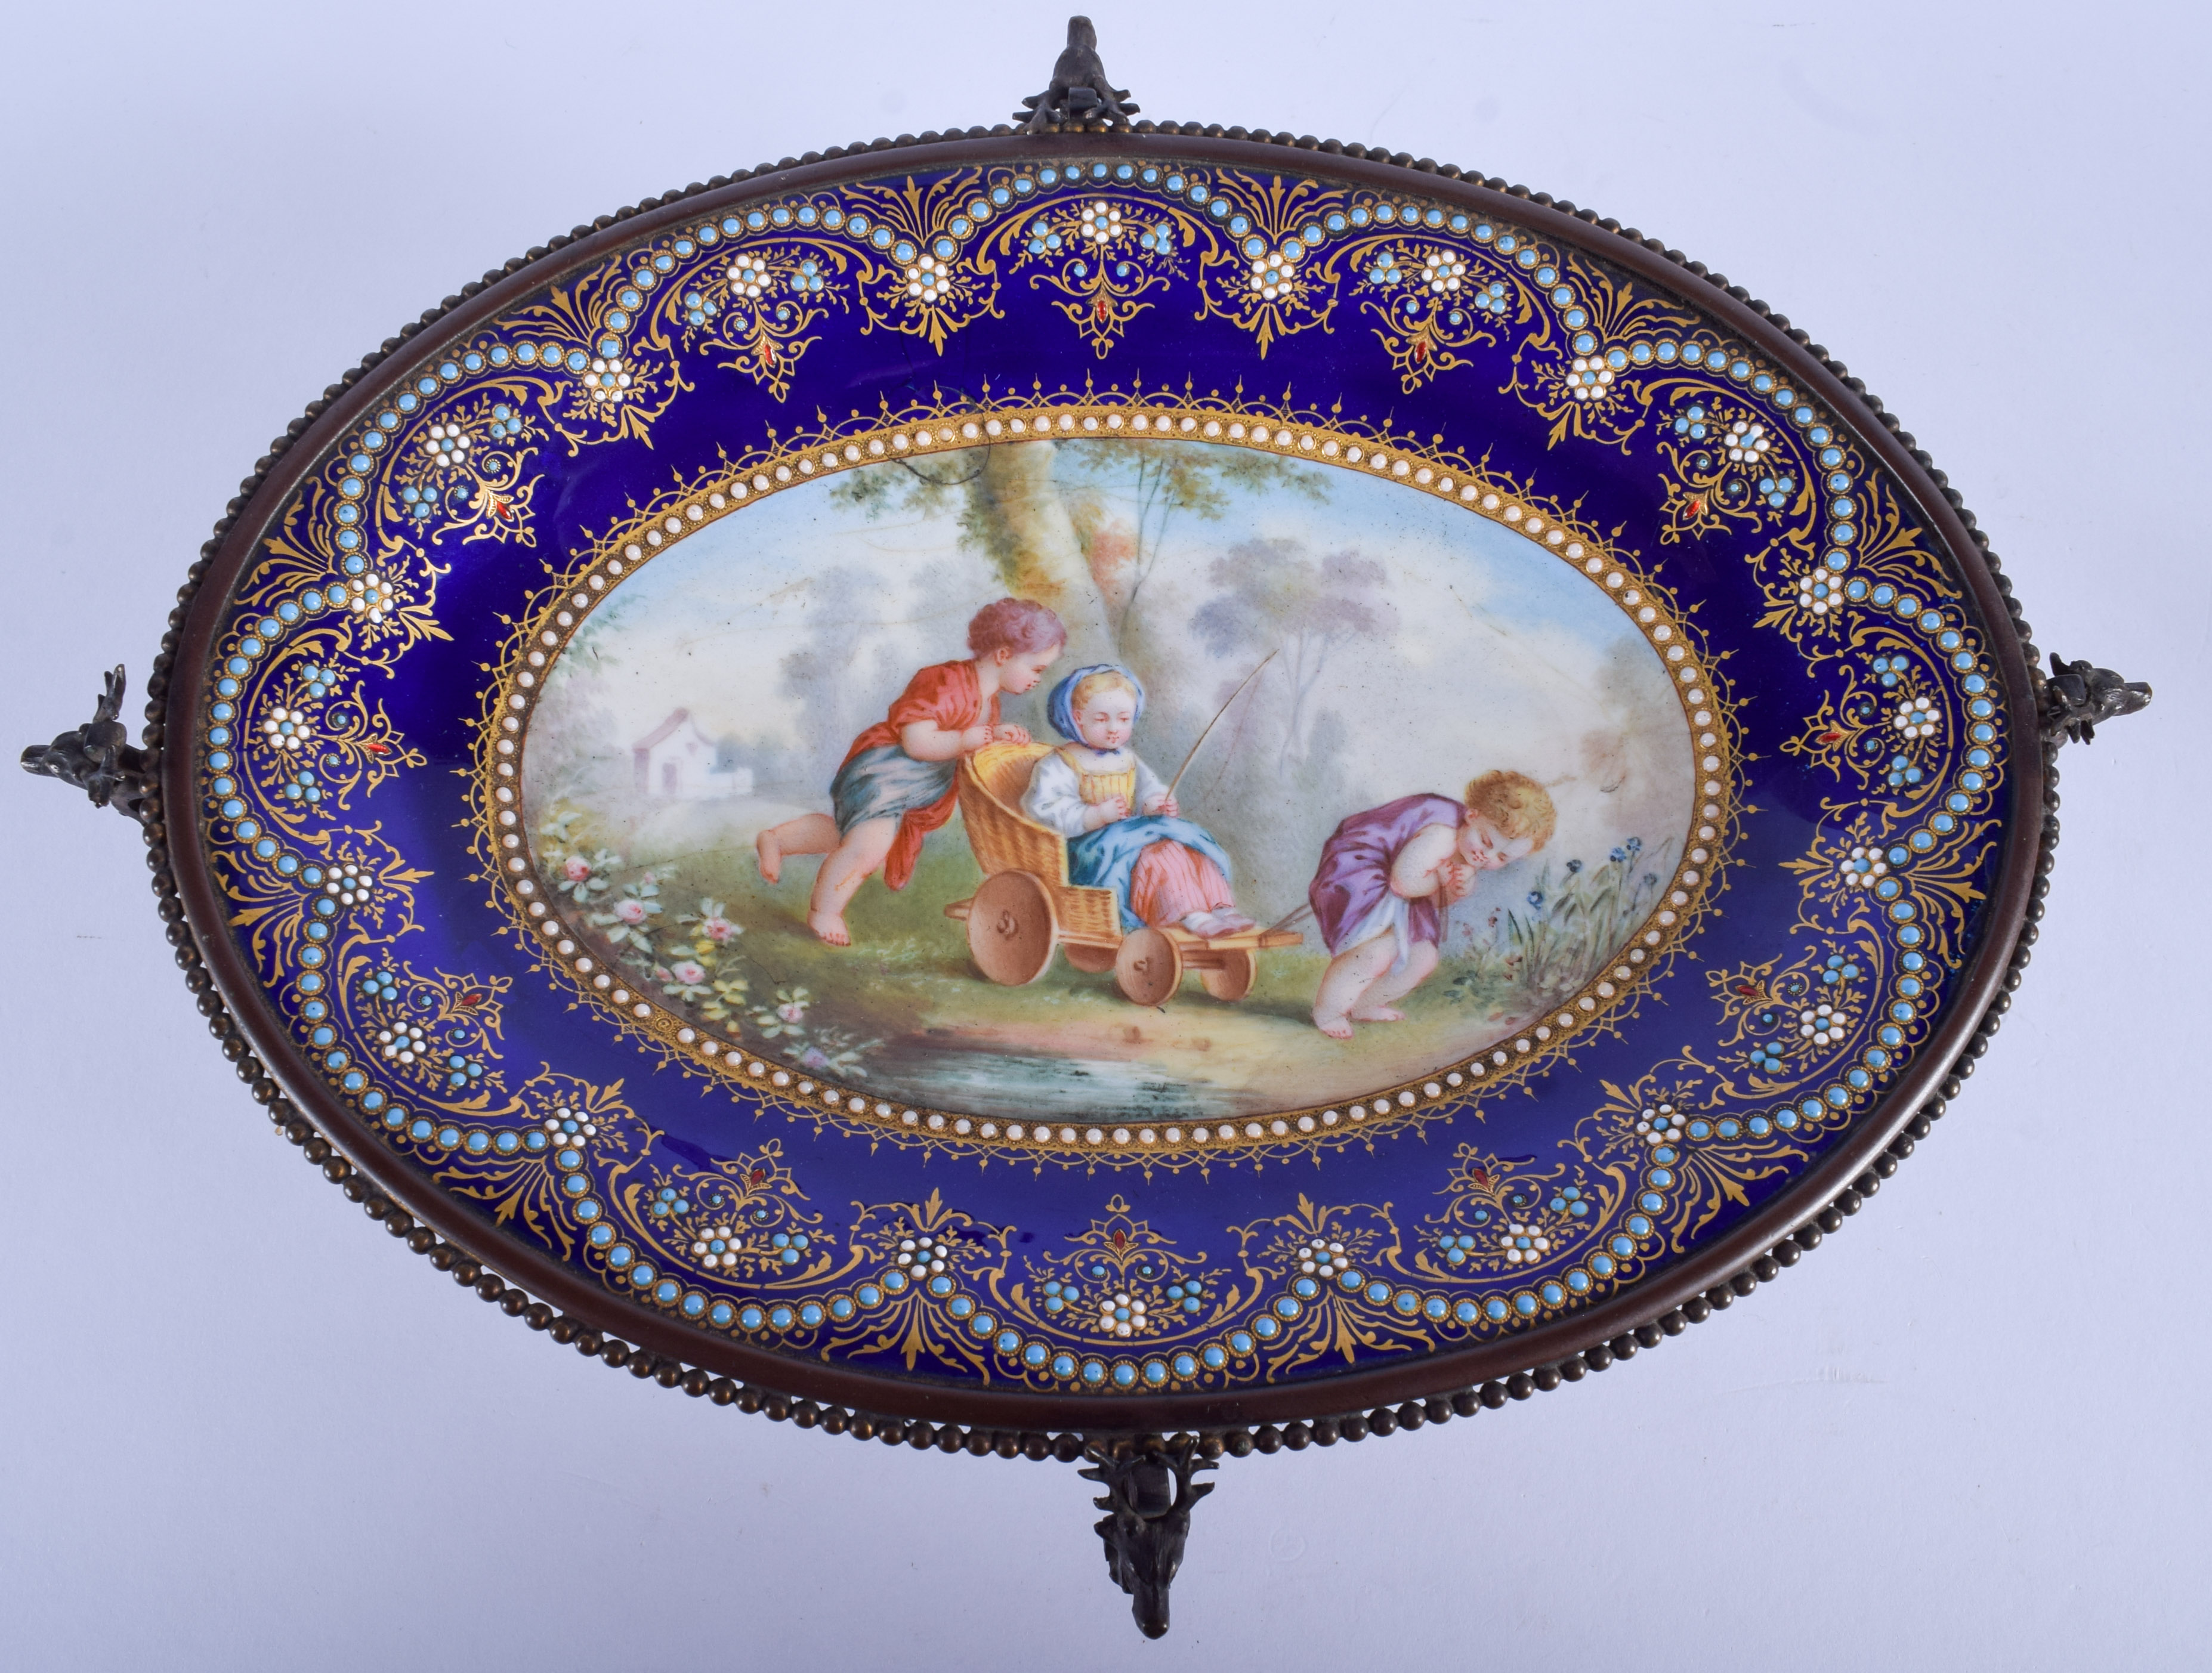 A 19TH CENTURY JAPANESE MEIJI PERIOD GILT METAL AND ENAMEL JEWELLED TAZZA painted with children with